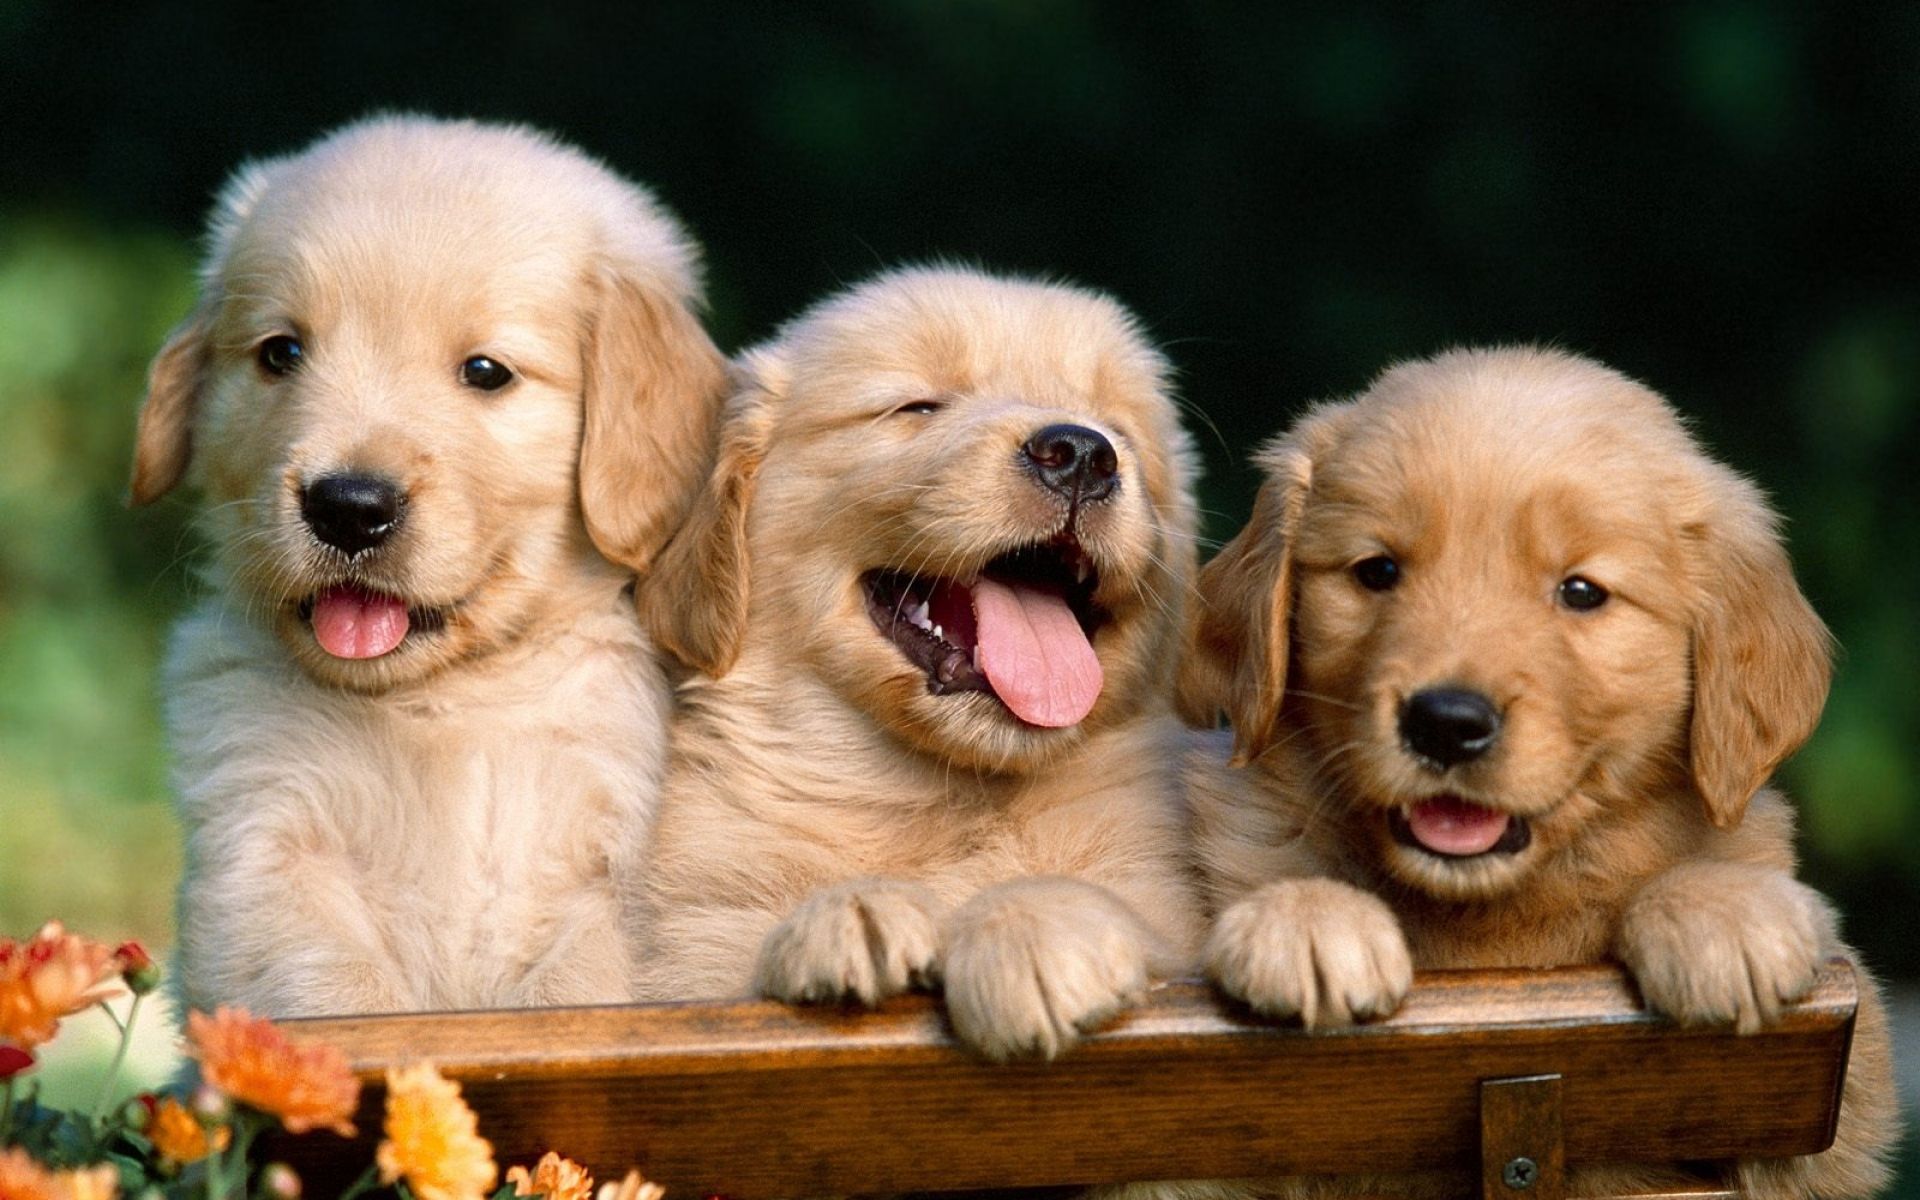 Cute Baby Puppies. Category, Baby Animals, tags: Golden